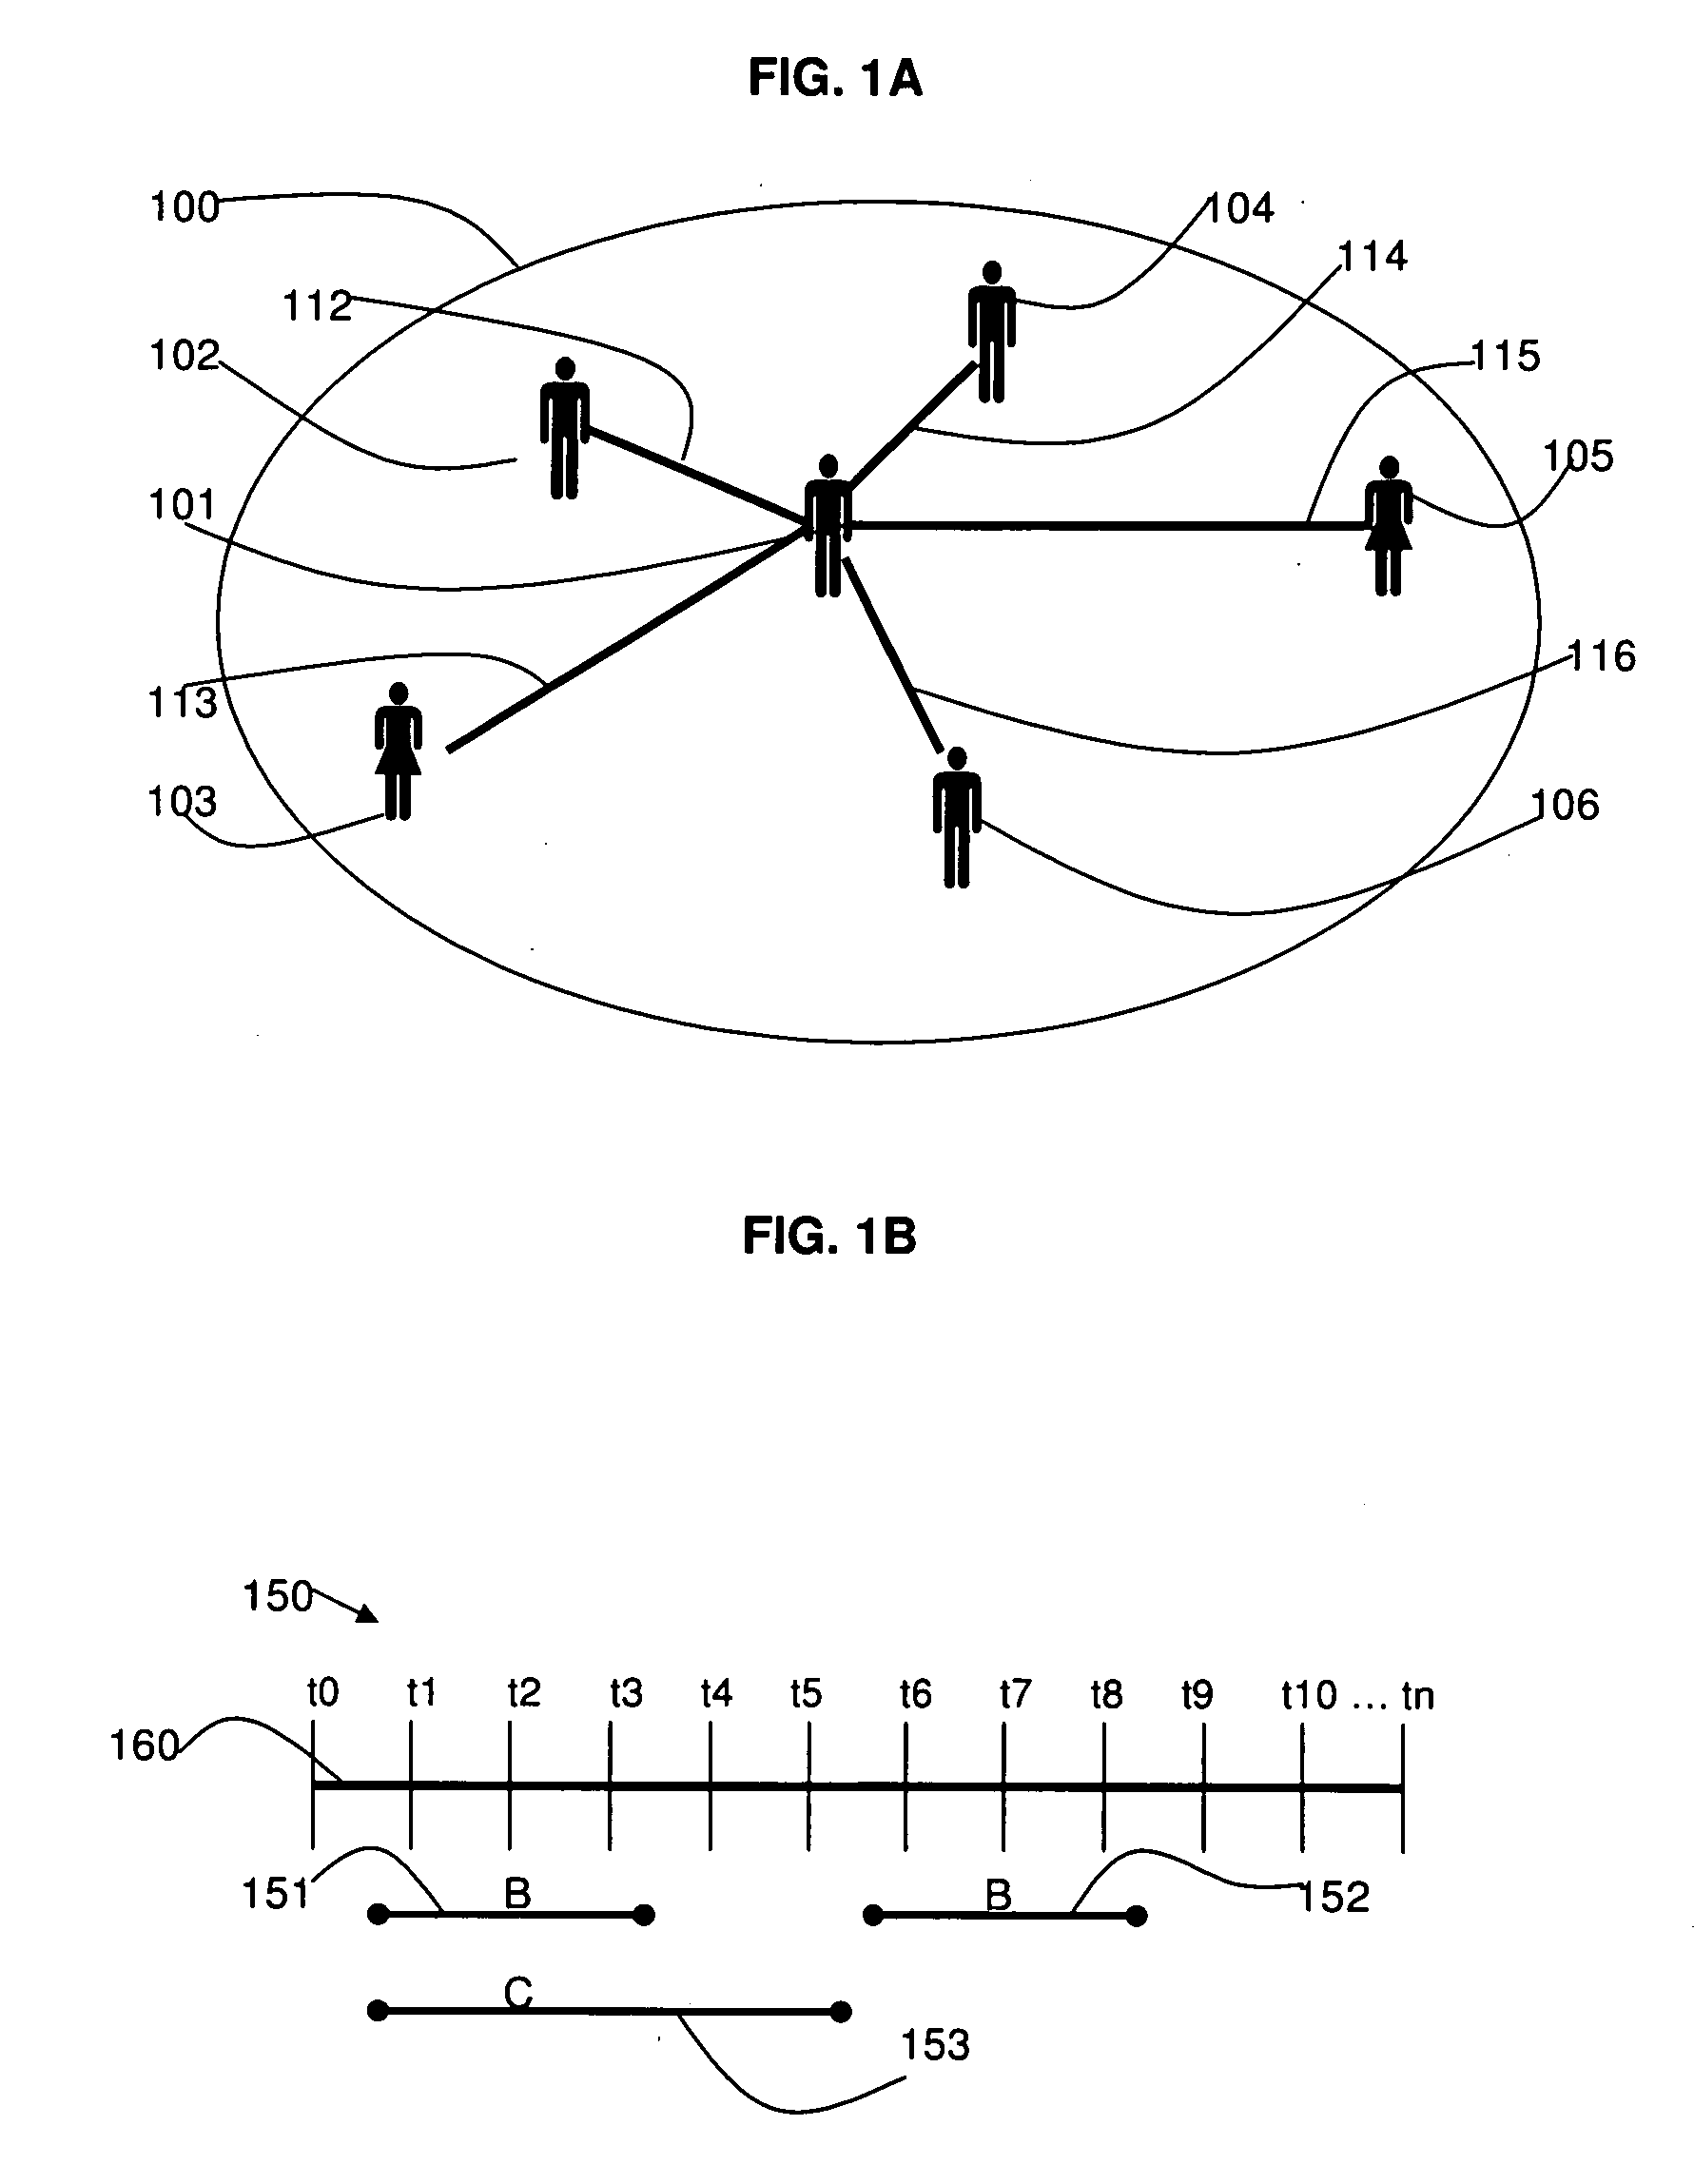 Method and System for Obtaining Social Network Information